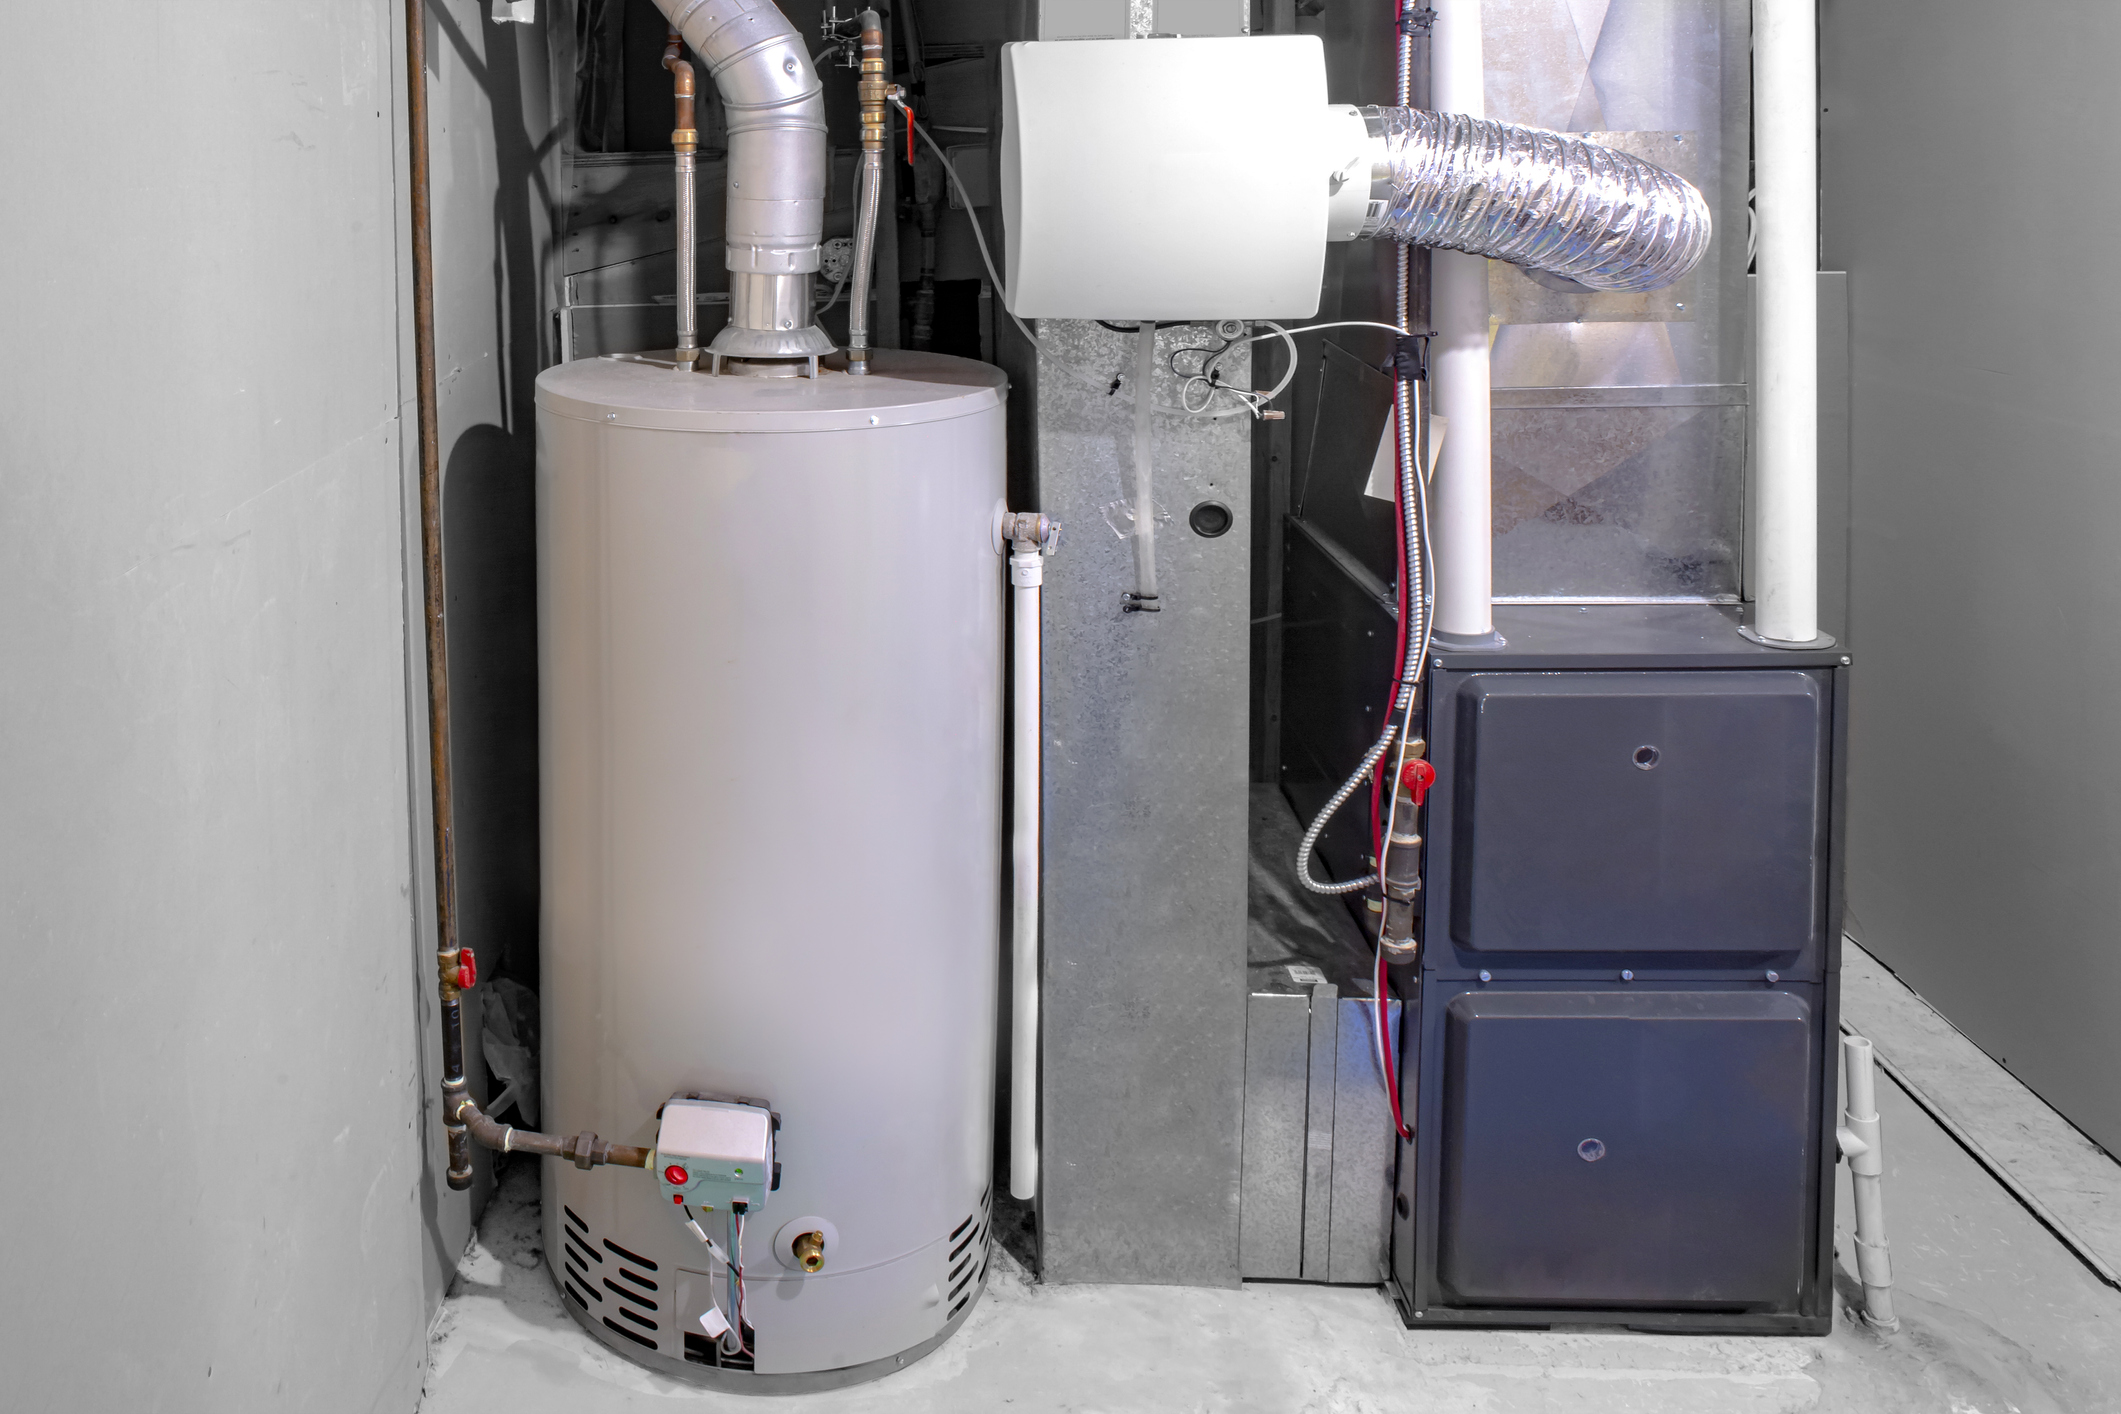 A modern furnace and gas water heater set up in the utility room of a residential home to help lower gas bills.